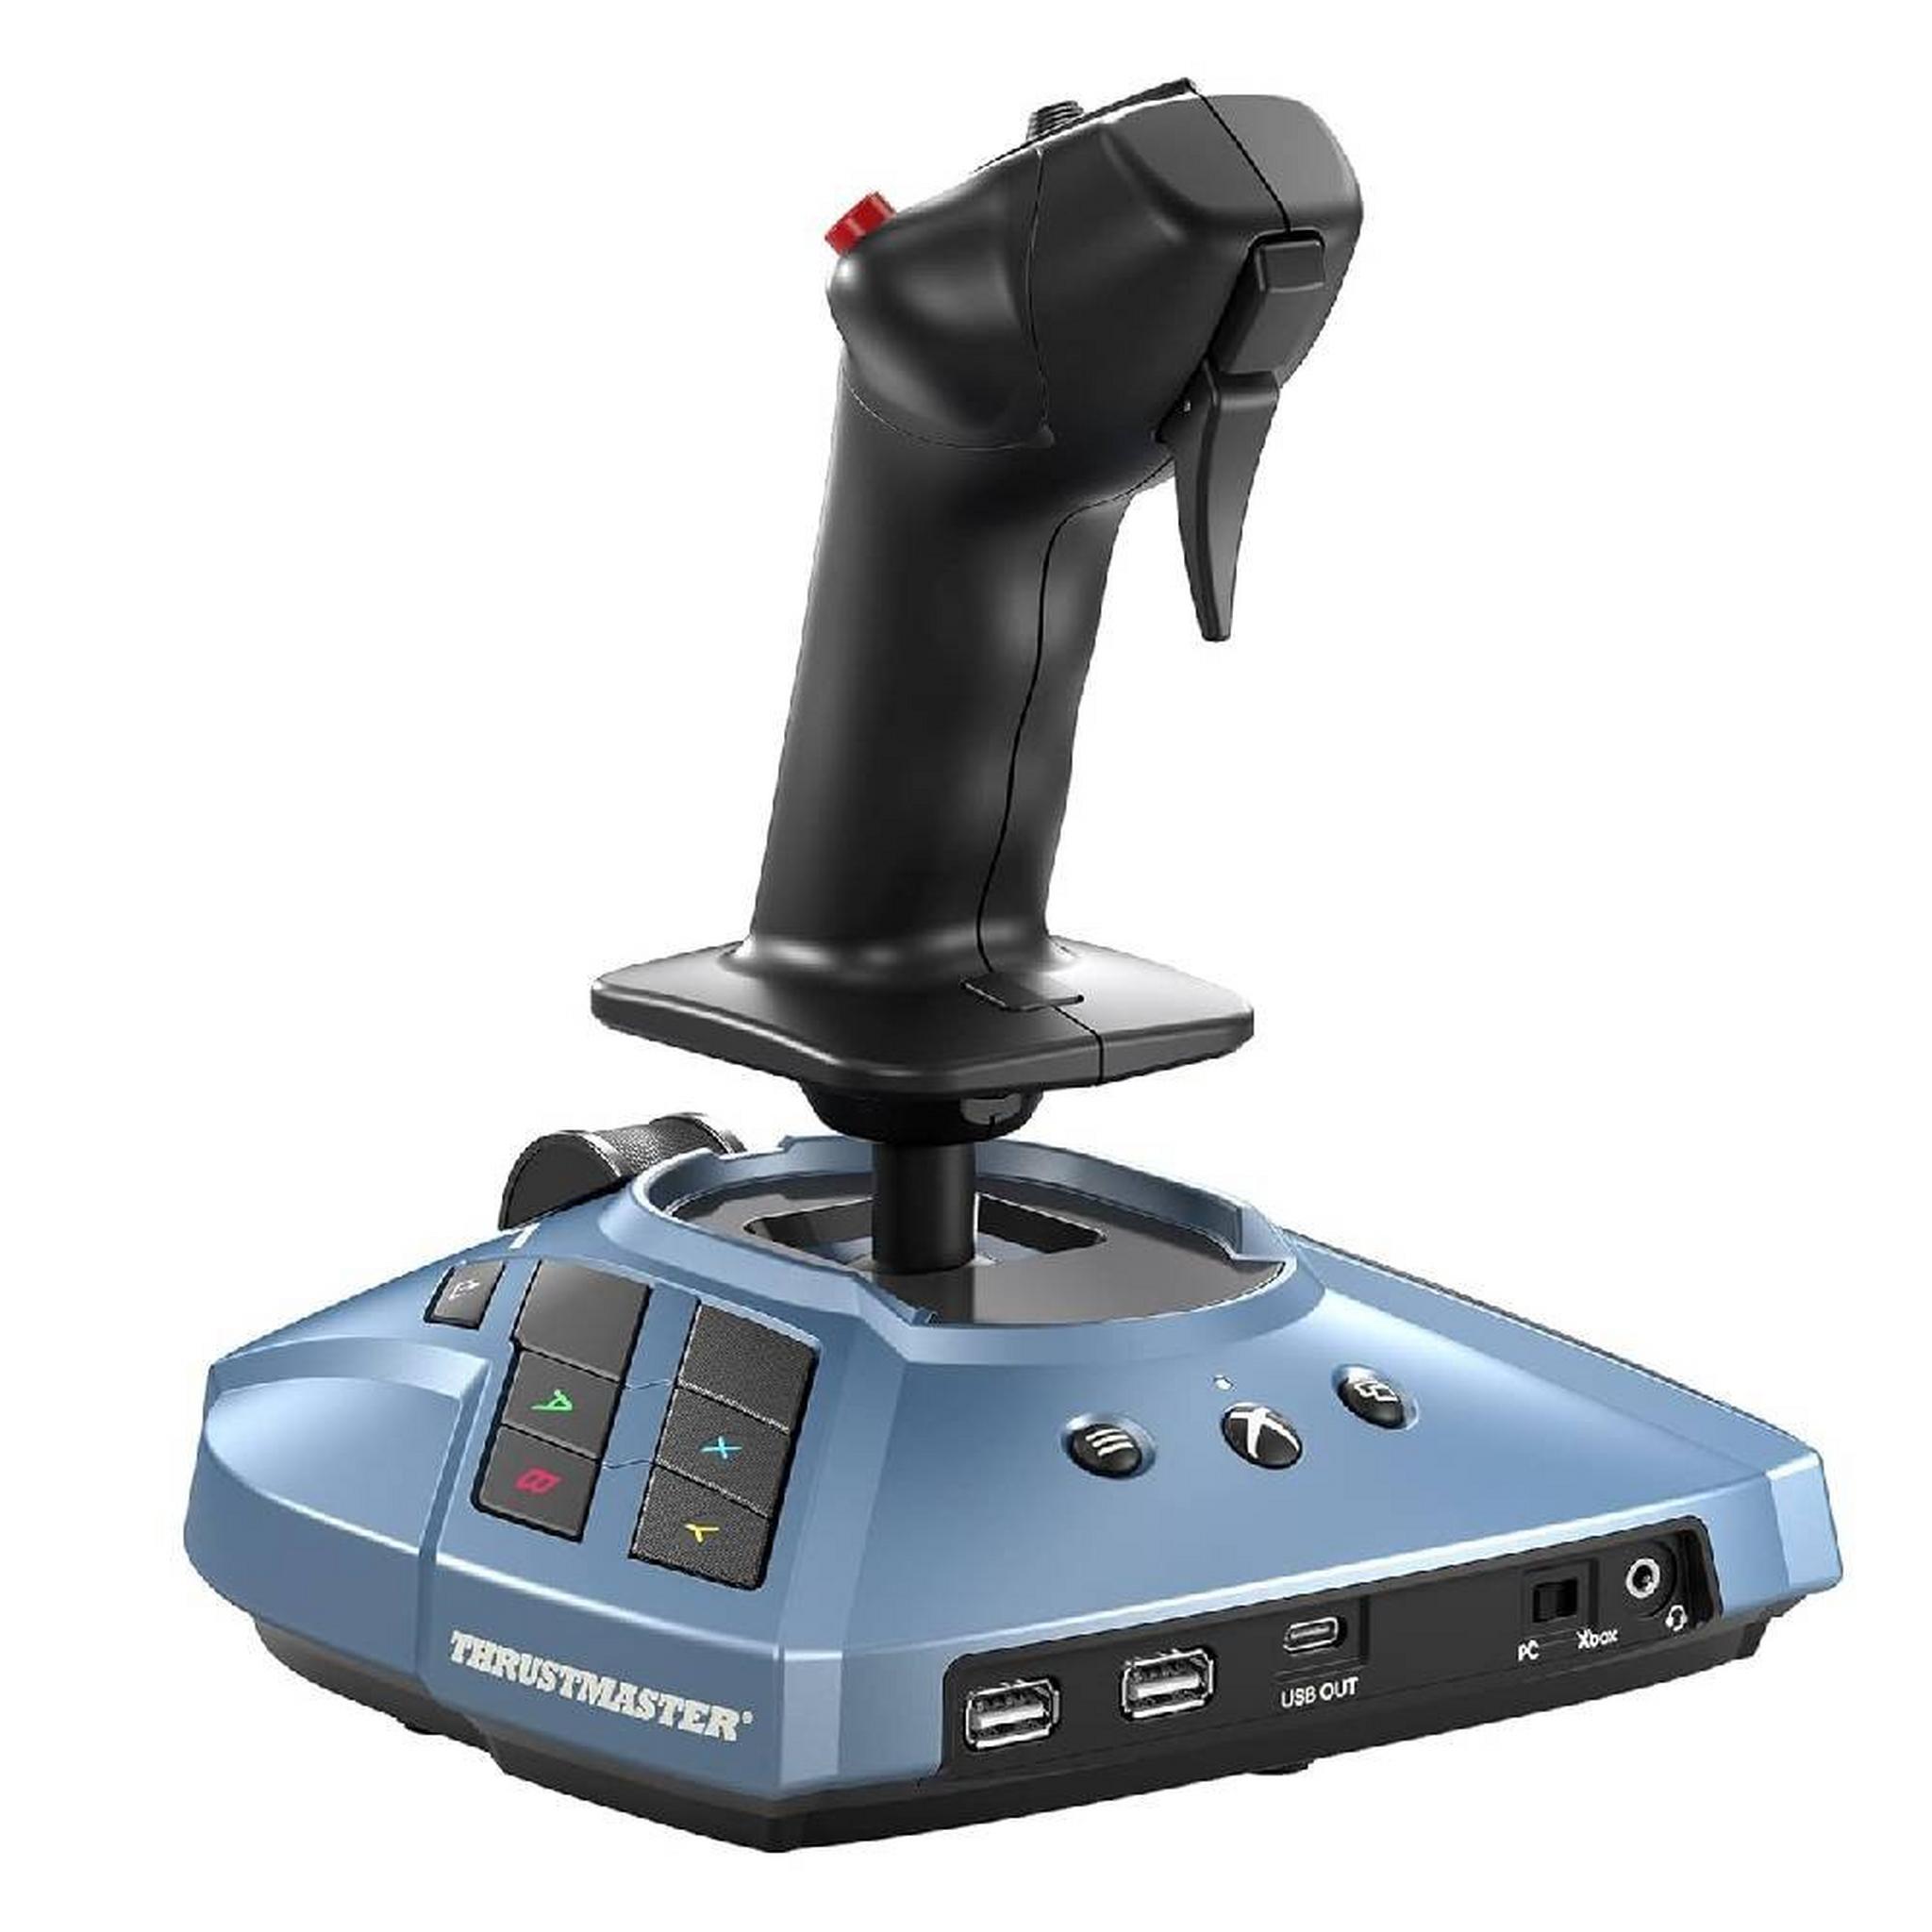 Thrustmaster TCA Captain Pack X Airbus Edition Sidestick and Quadrant for Xbox Series X|S & PC, TM-JSTK-CPTN-PACK - Blue